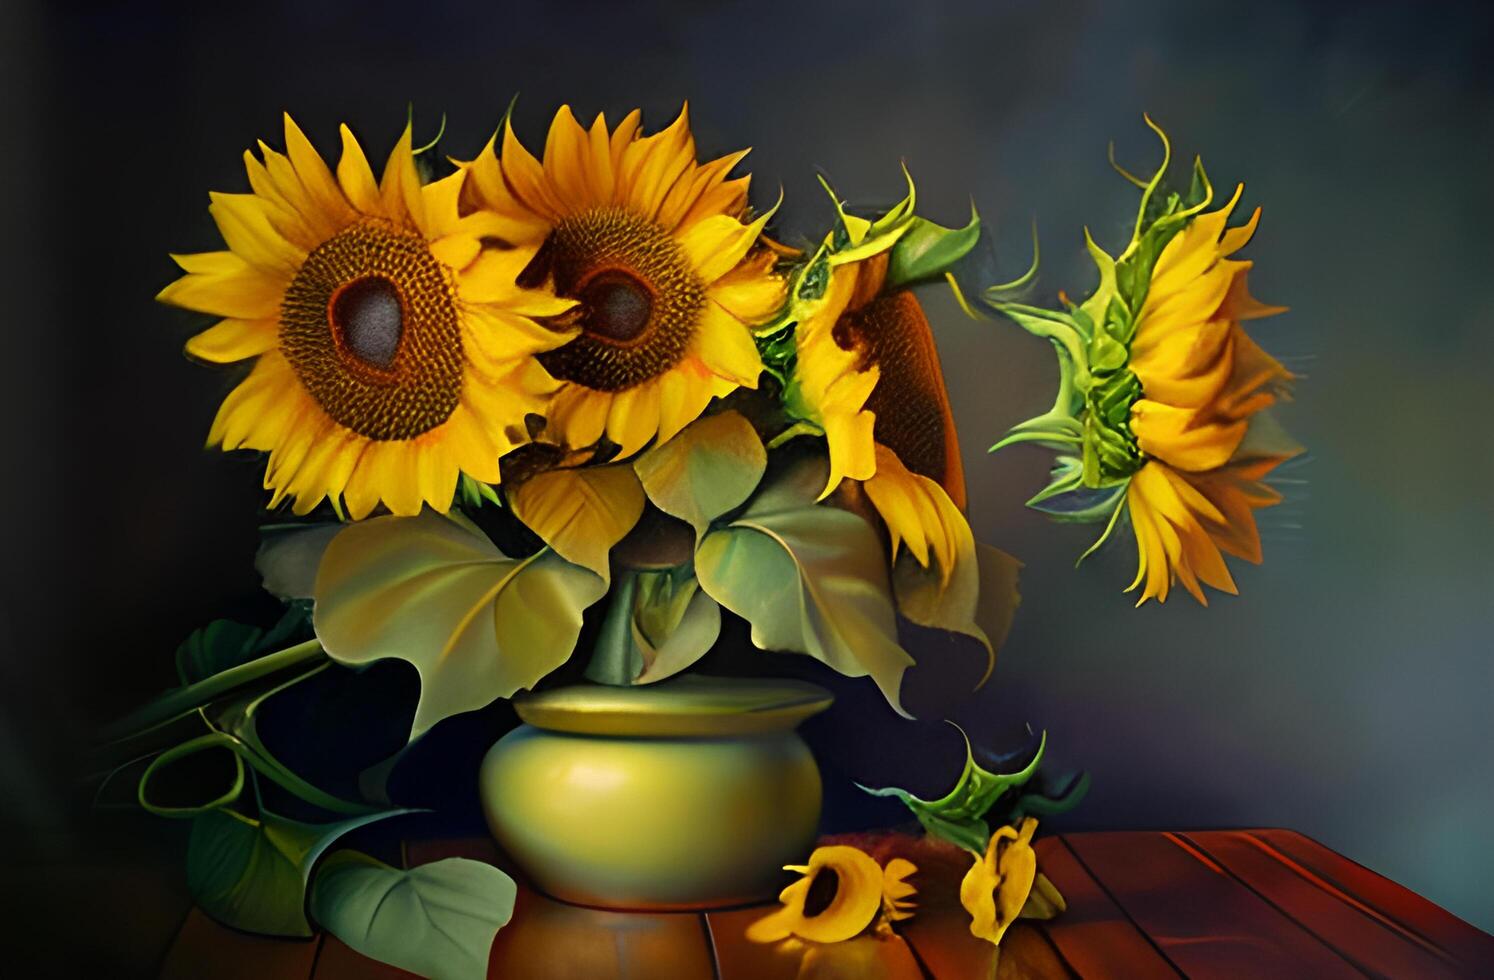 Sunflowers lovely canvas oil painting vases of sunflowers based on the painting Photo